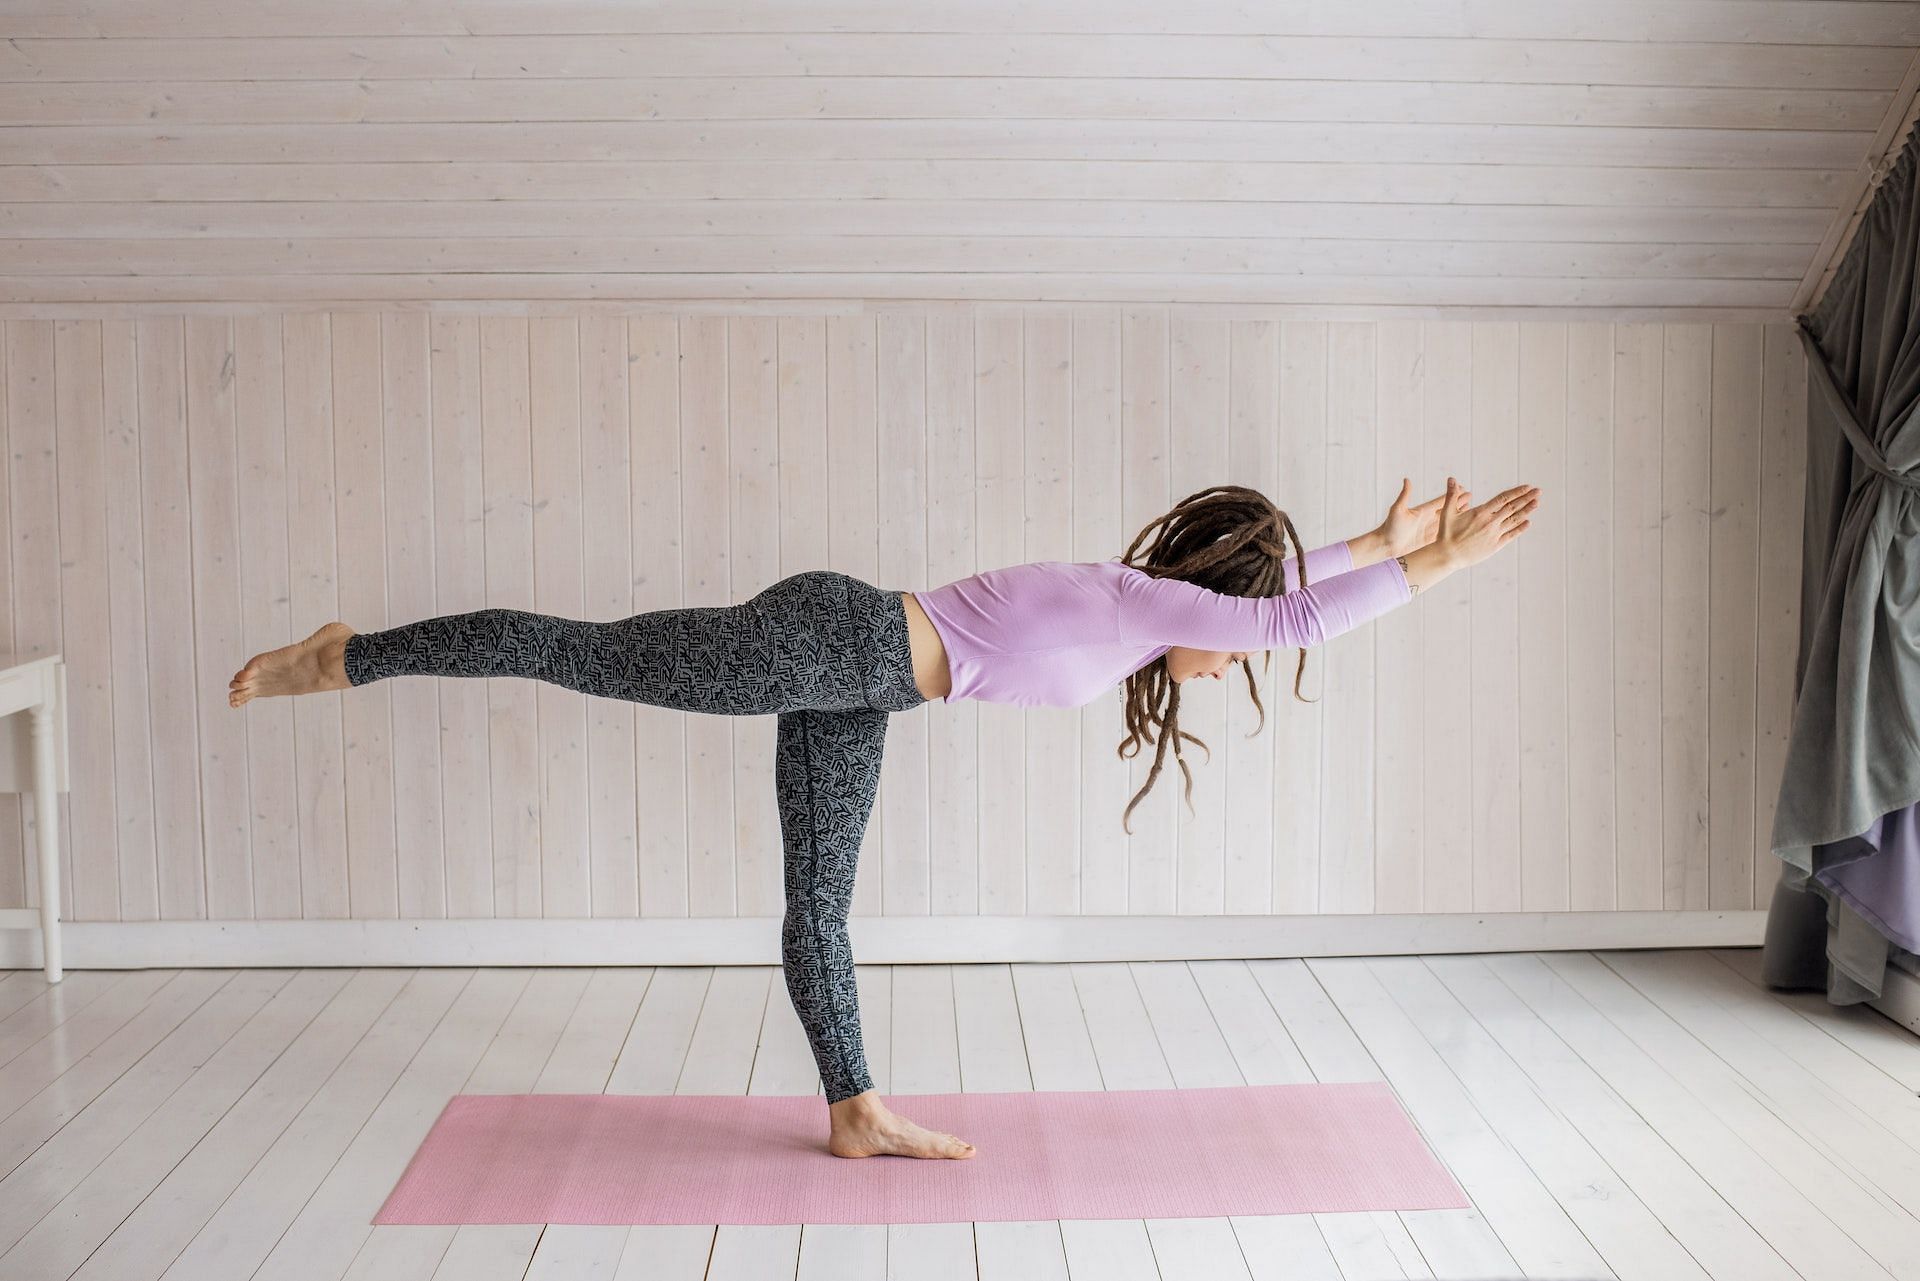 Yoga exercises can activate the glute muscles. (Photo via Pexels/ Alexy Almond)